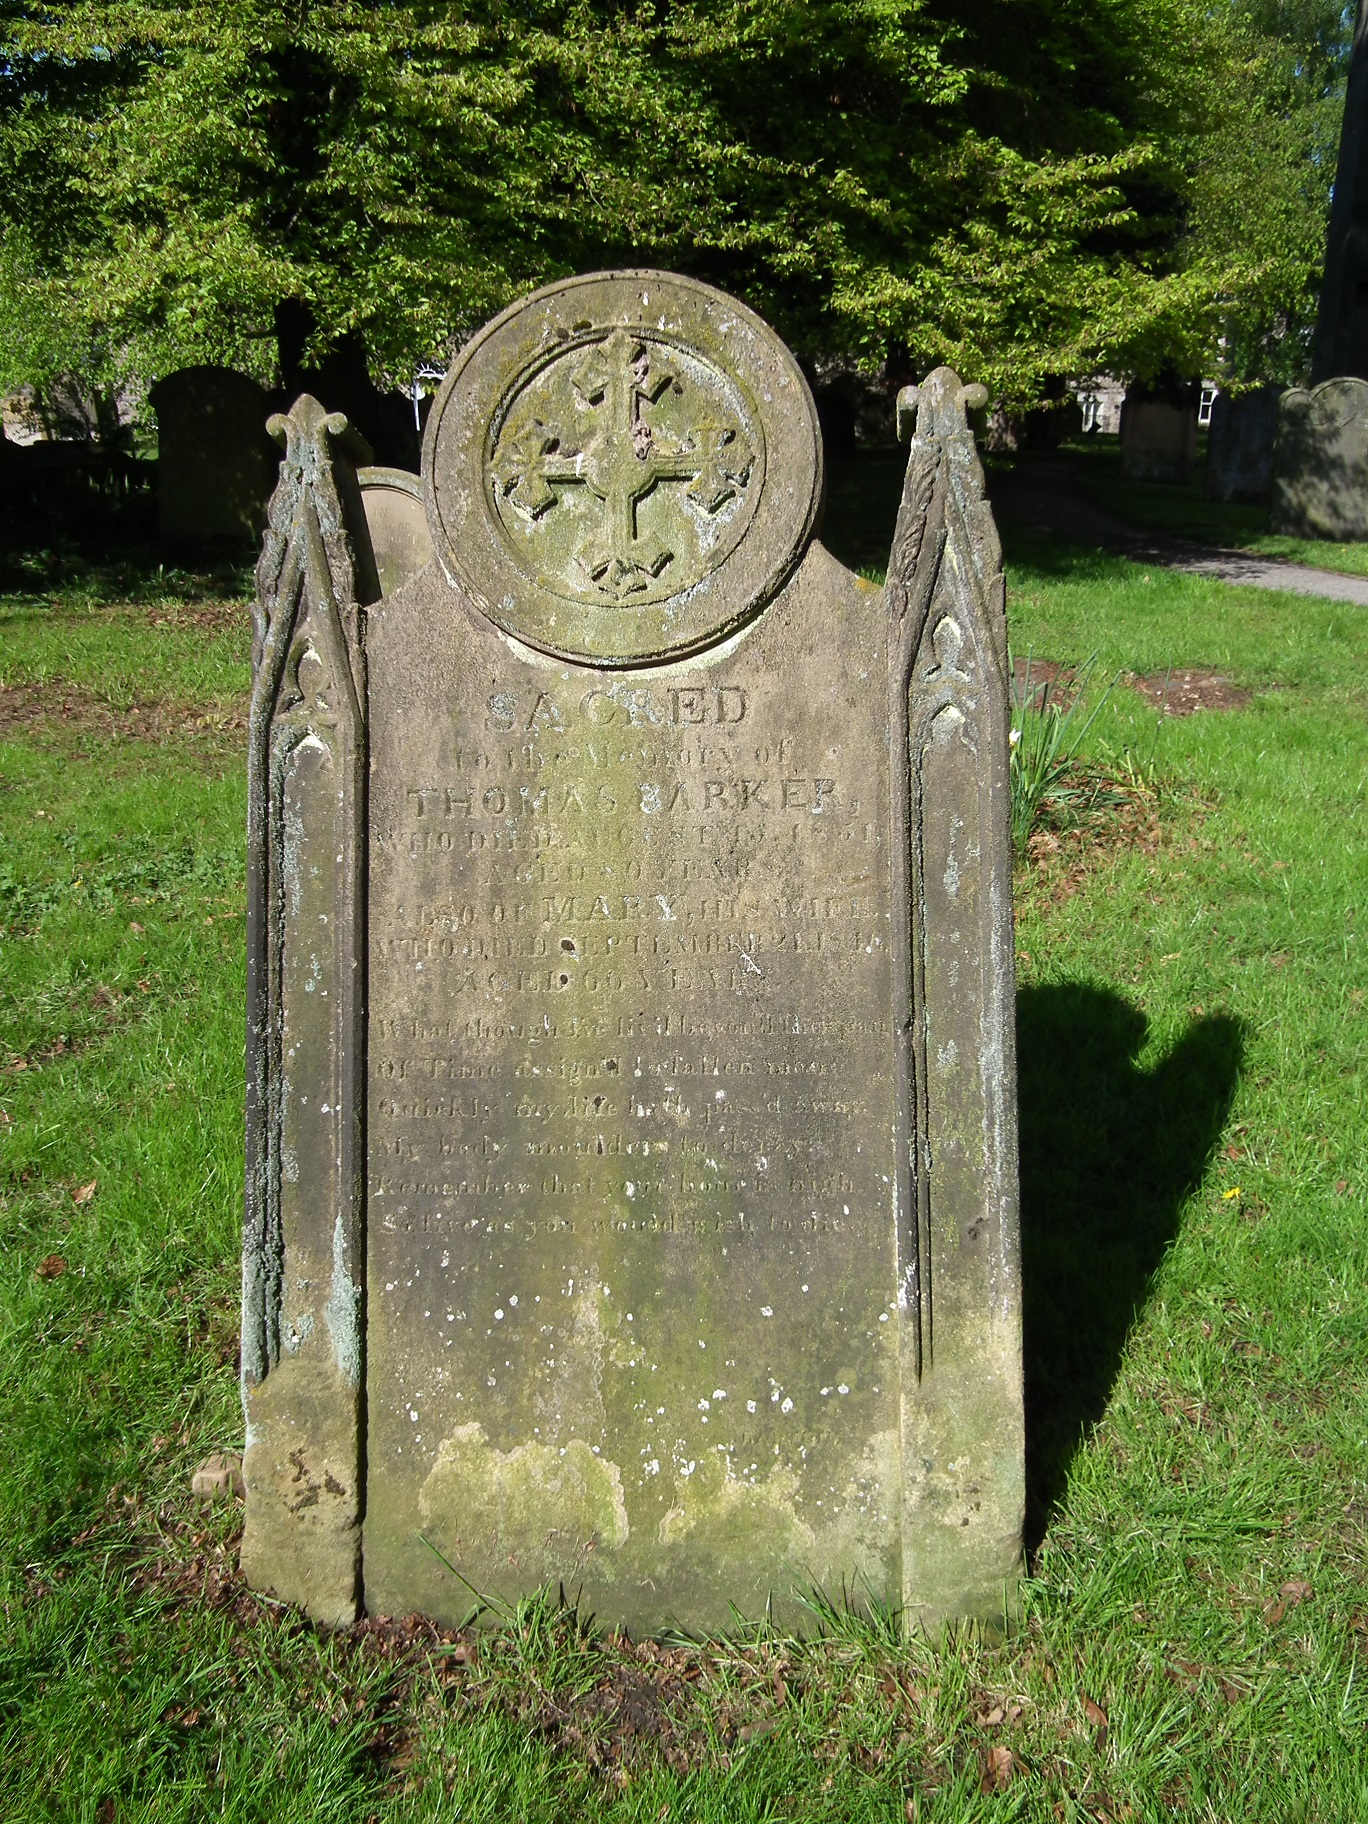 A headstone from Helmsley with a cross motif